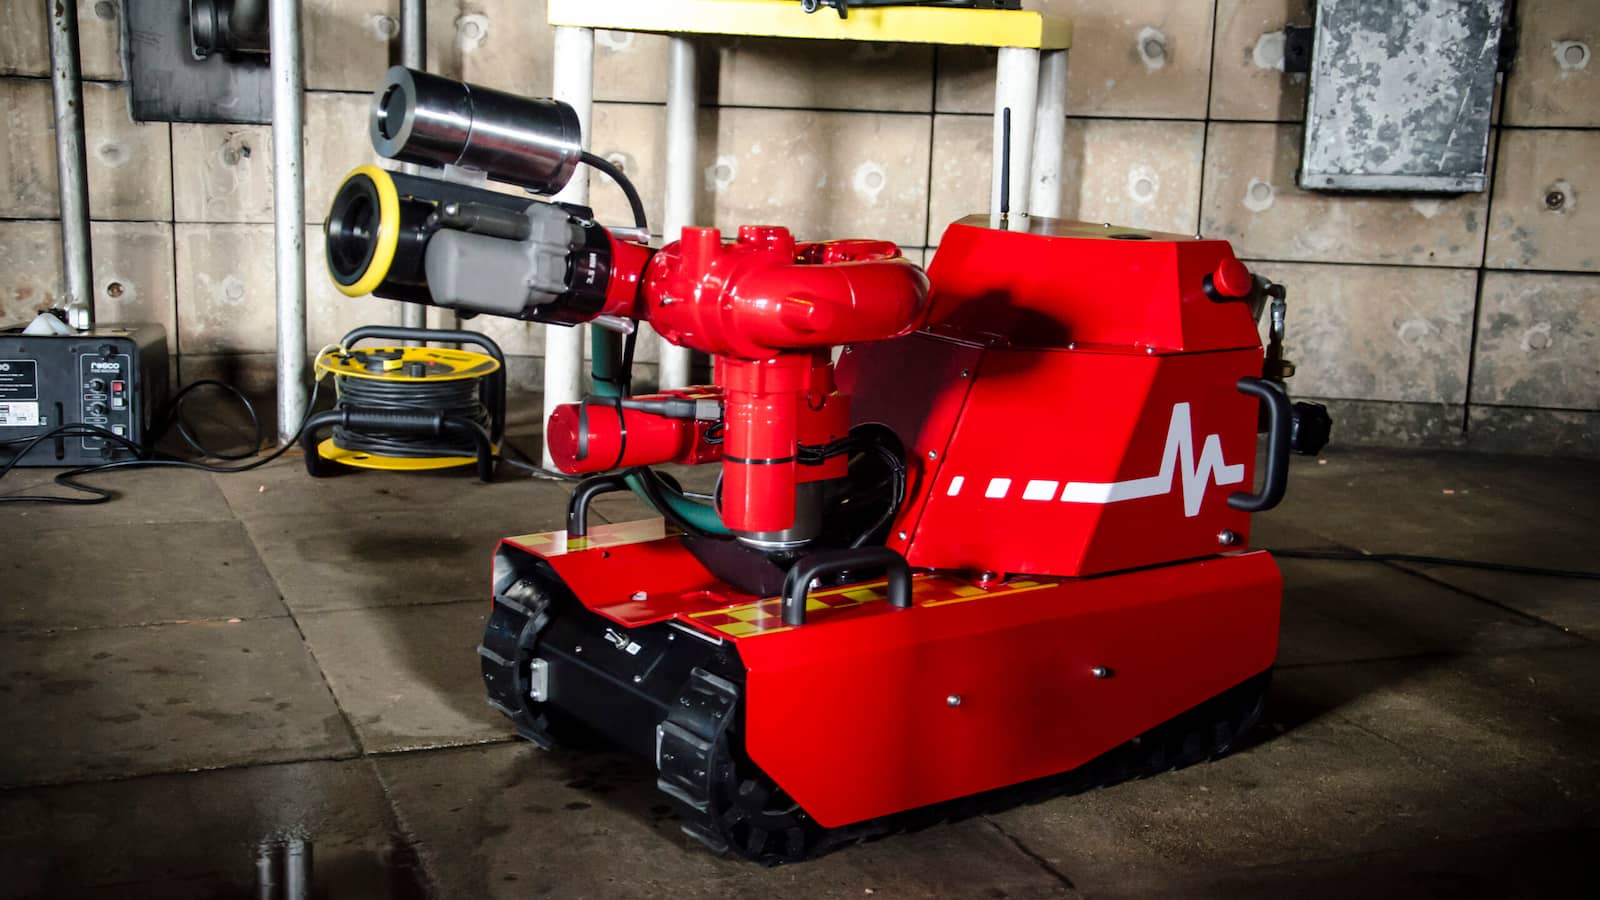 HOPE Technik’s Firefighting Robot is used to fight fire in dangerous situations.